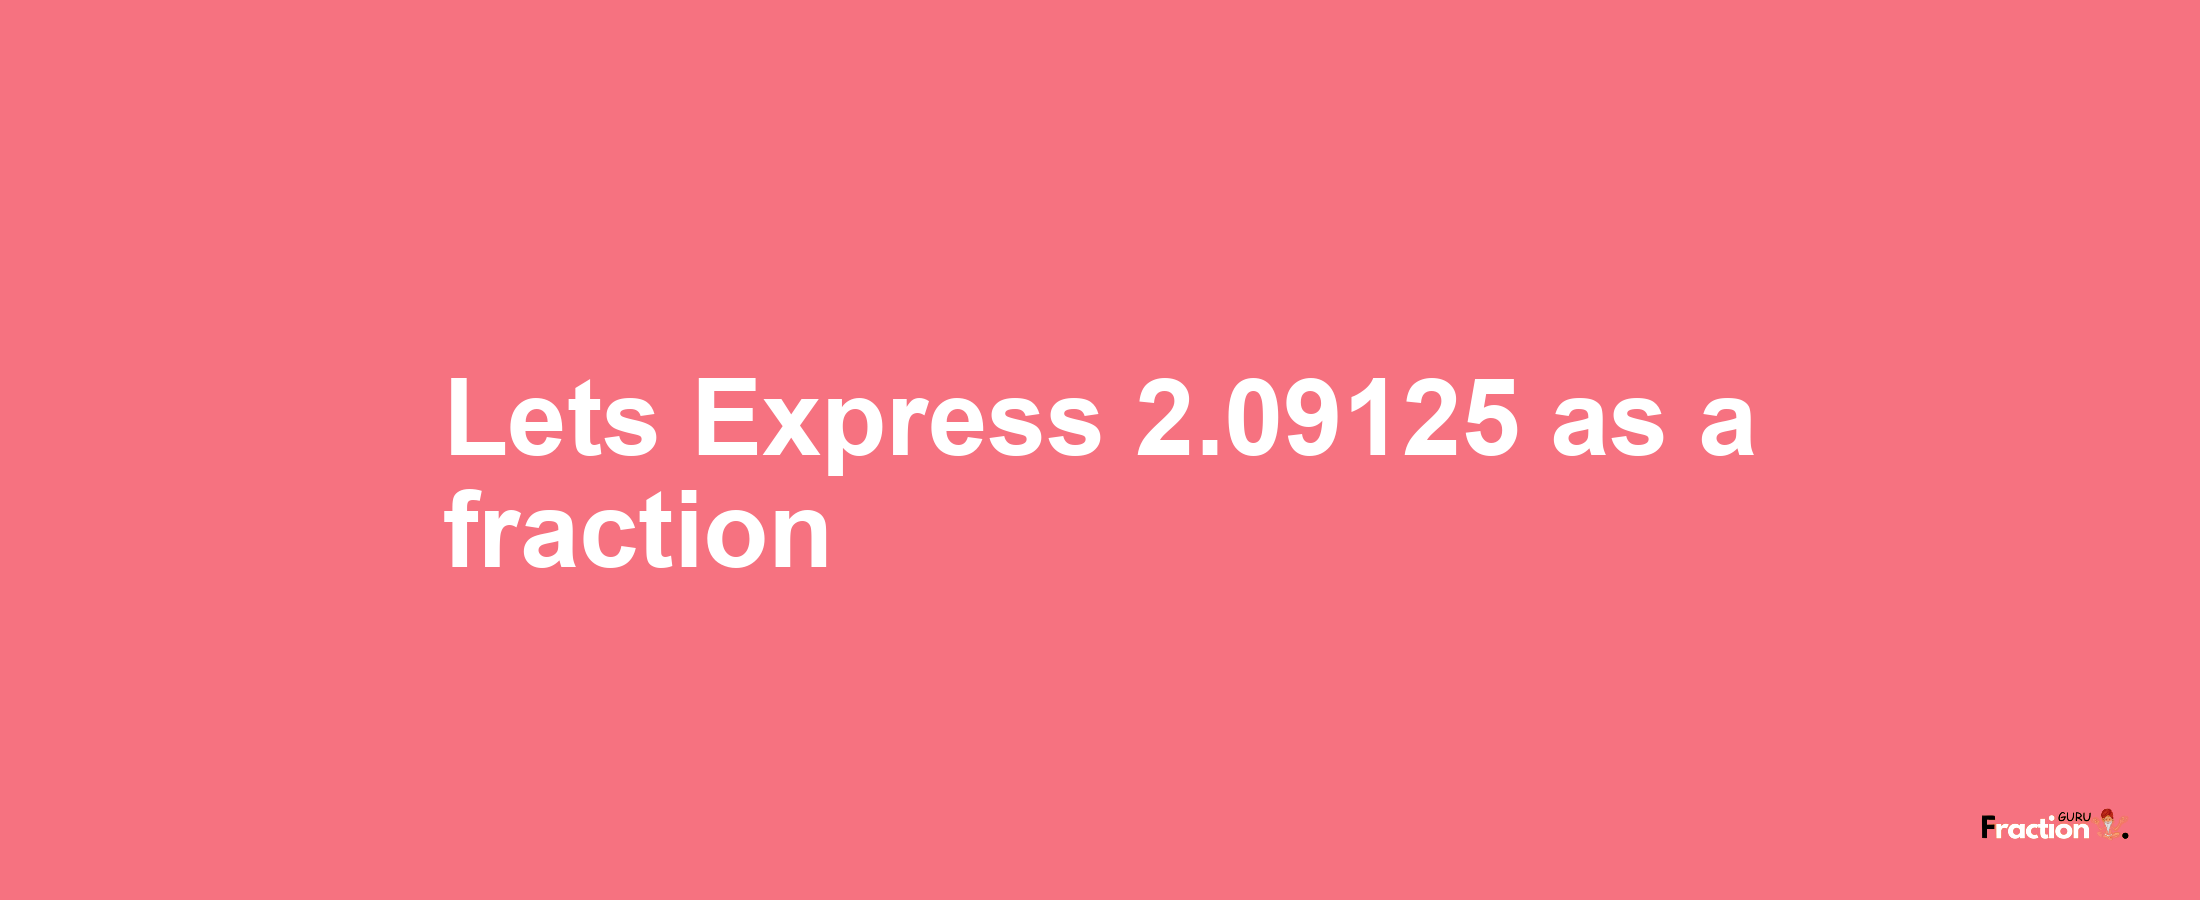 Lets Express 2.09125 as afraction